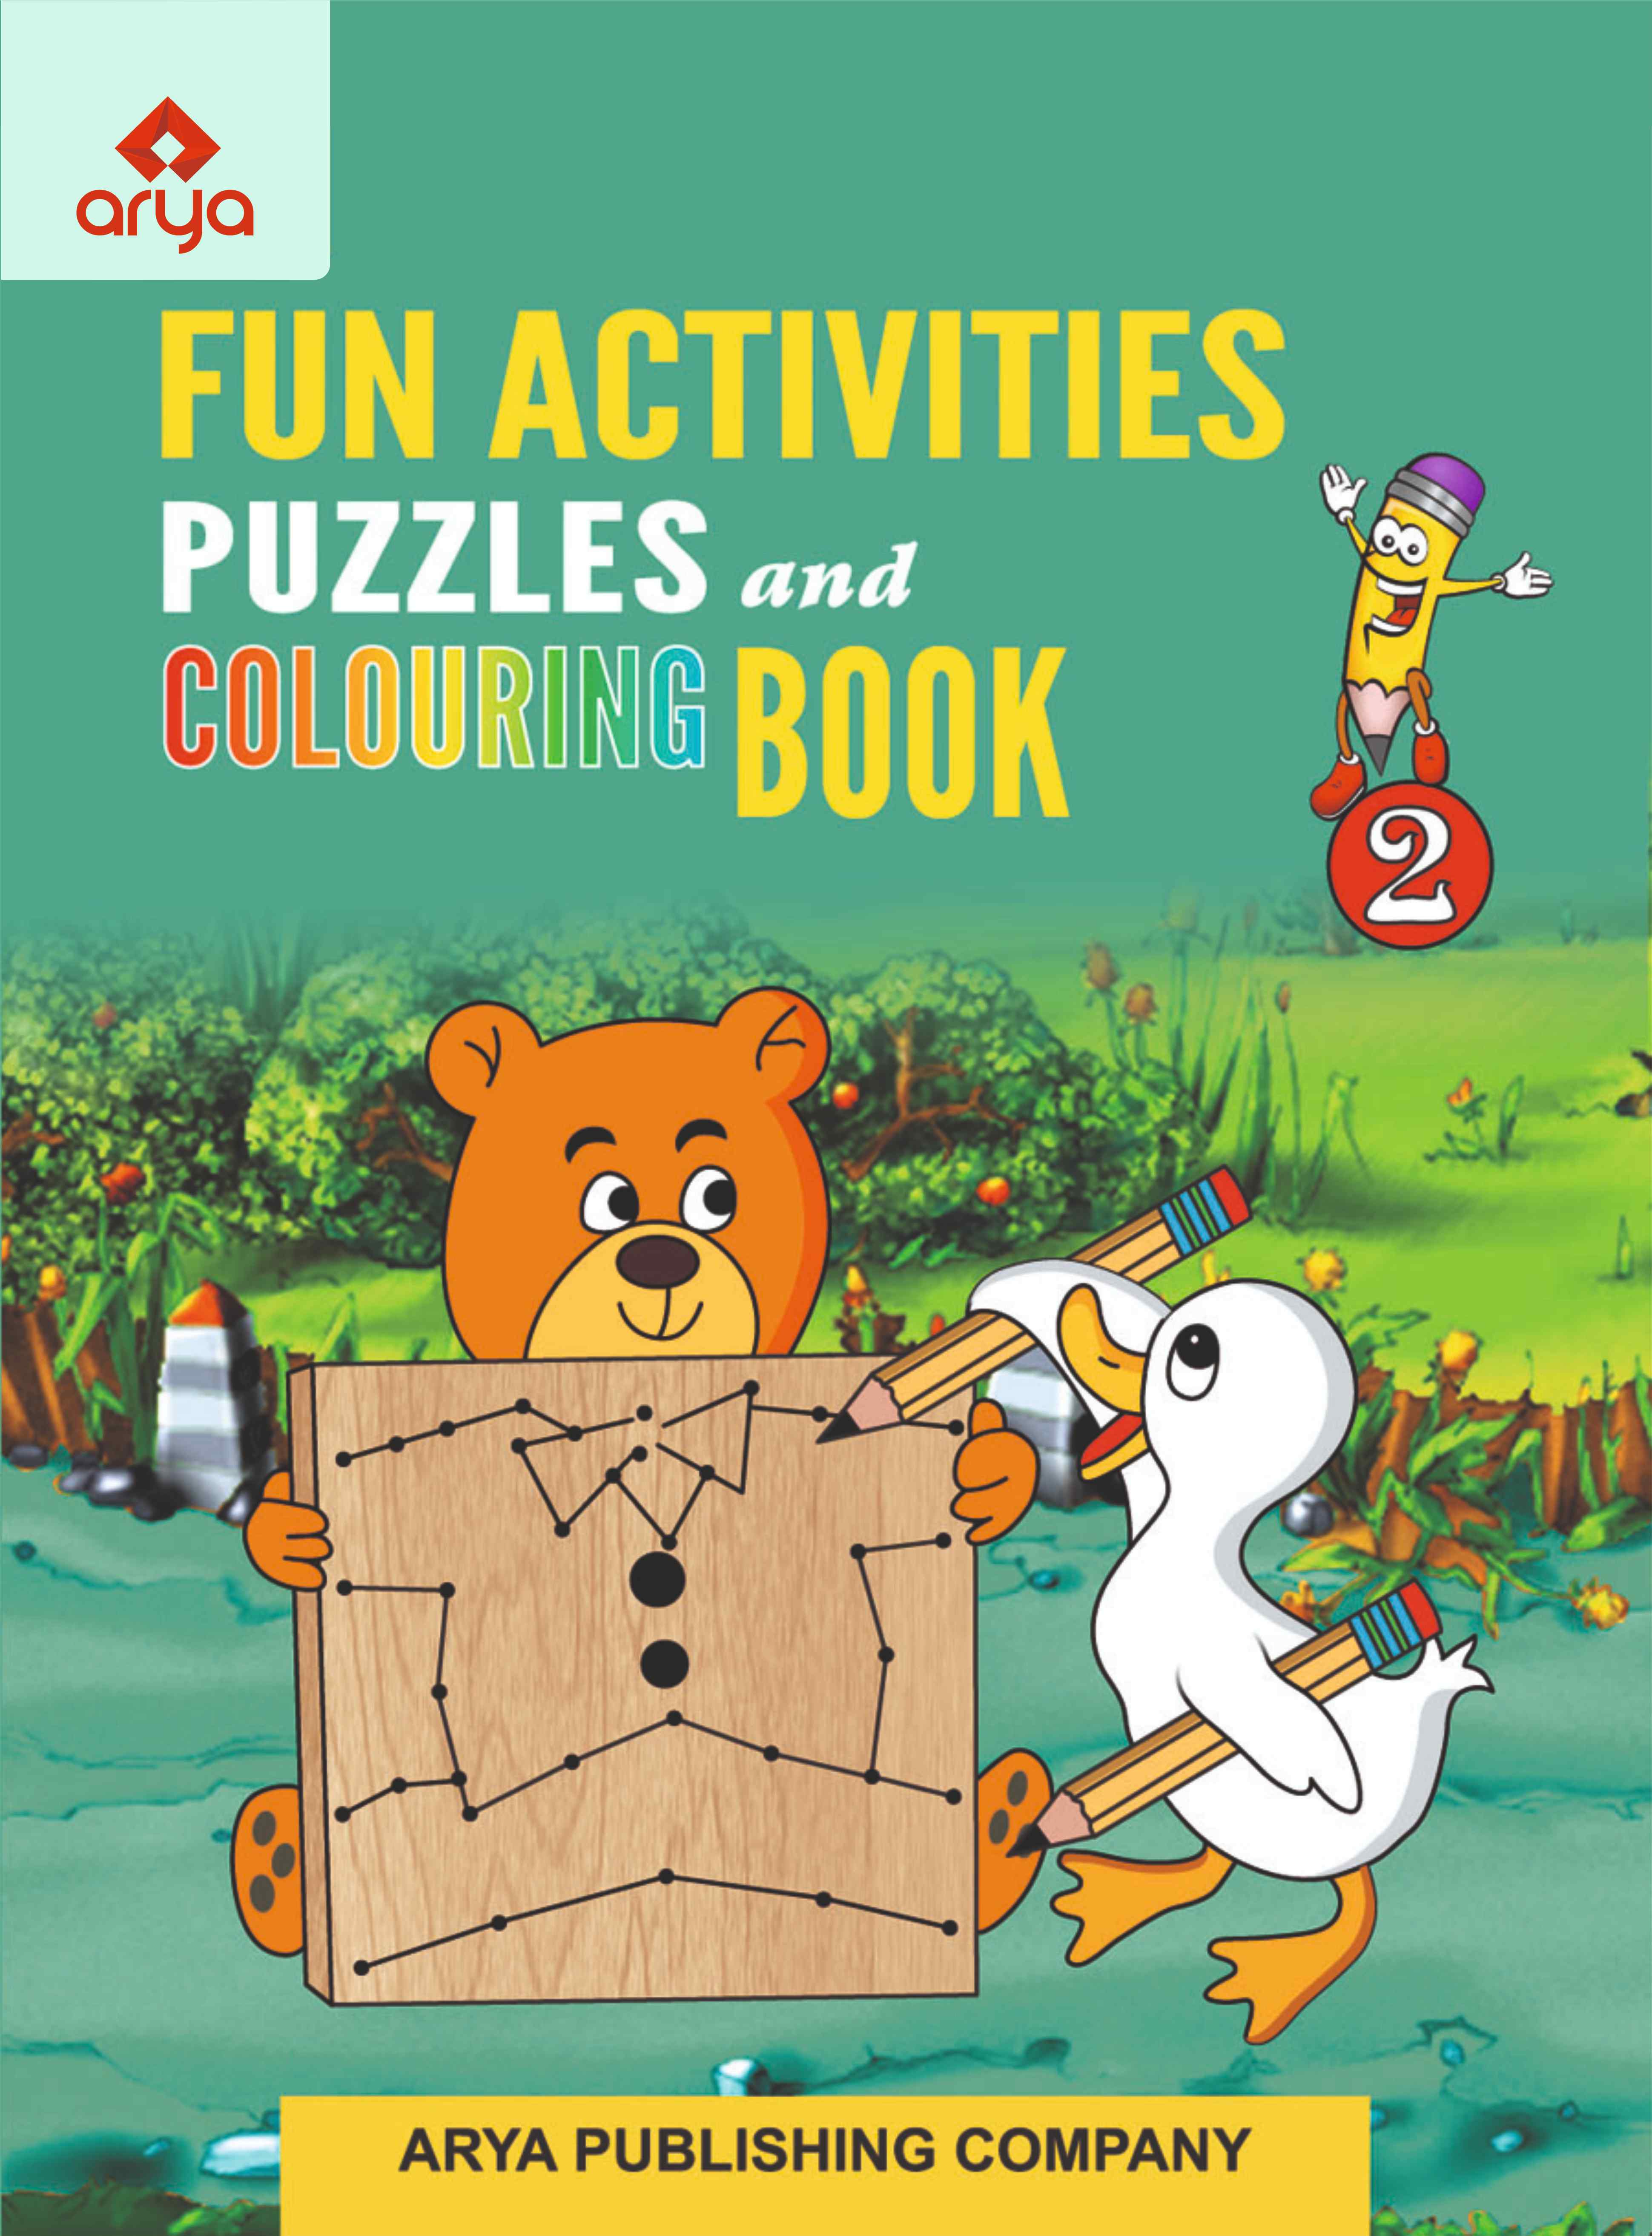 Fun Activities Puzzles and Colouring Book-2